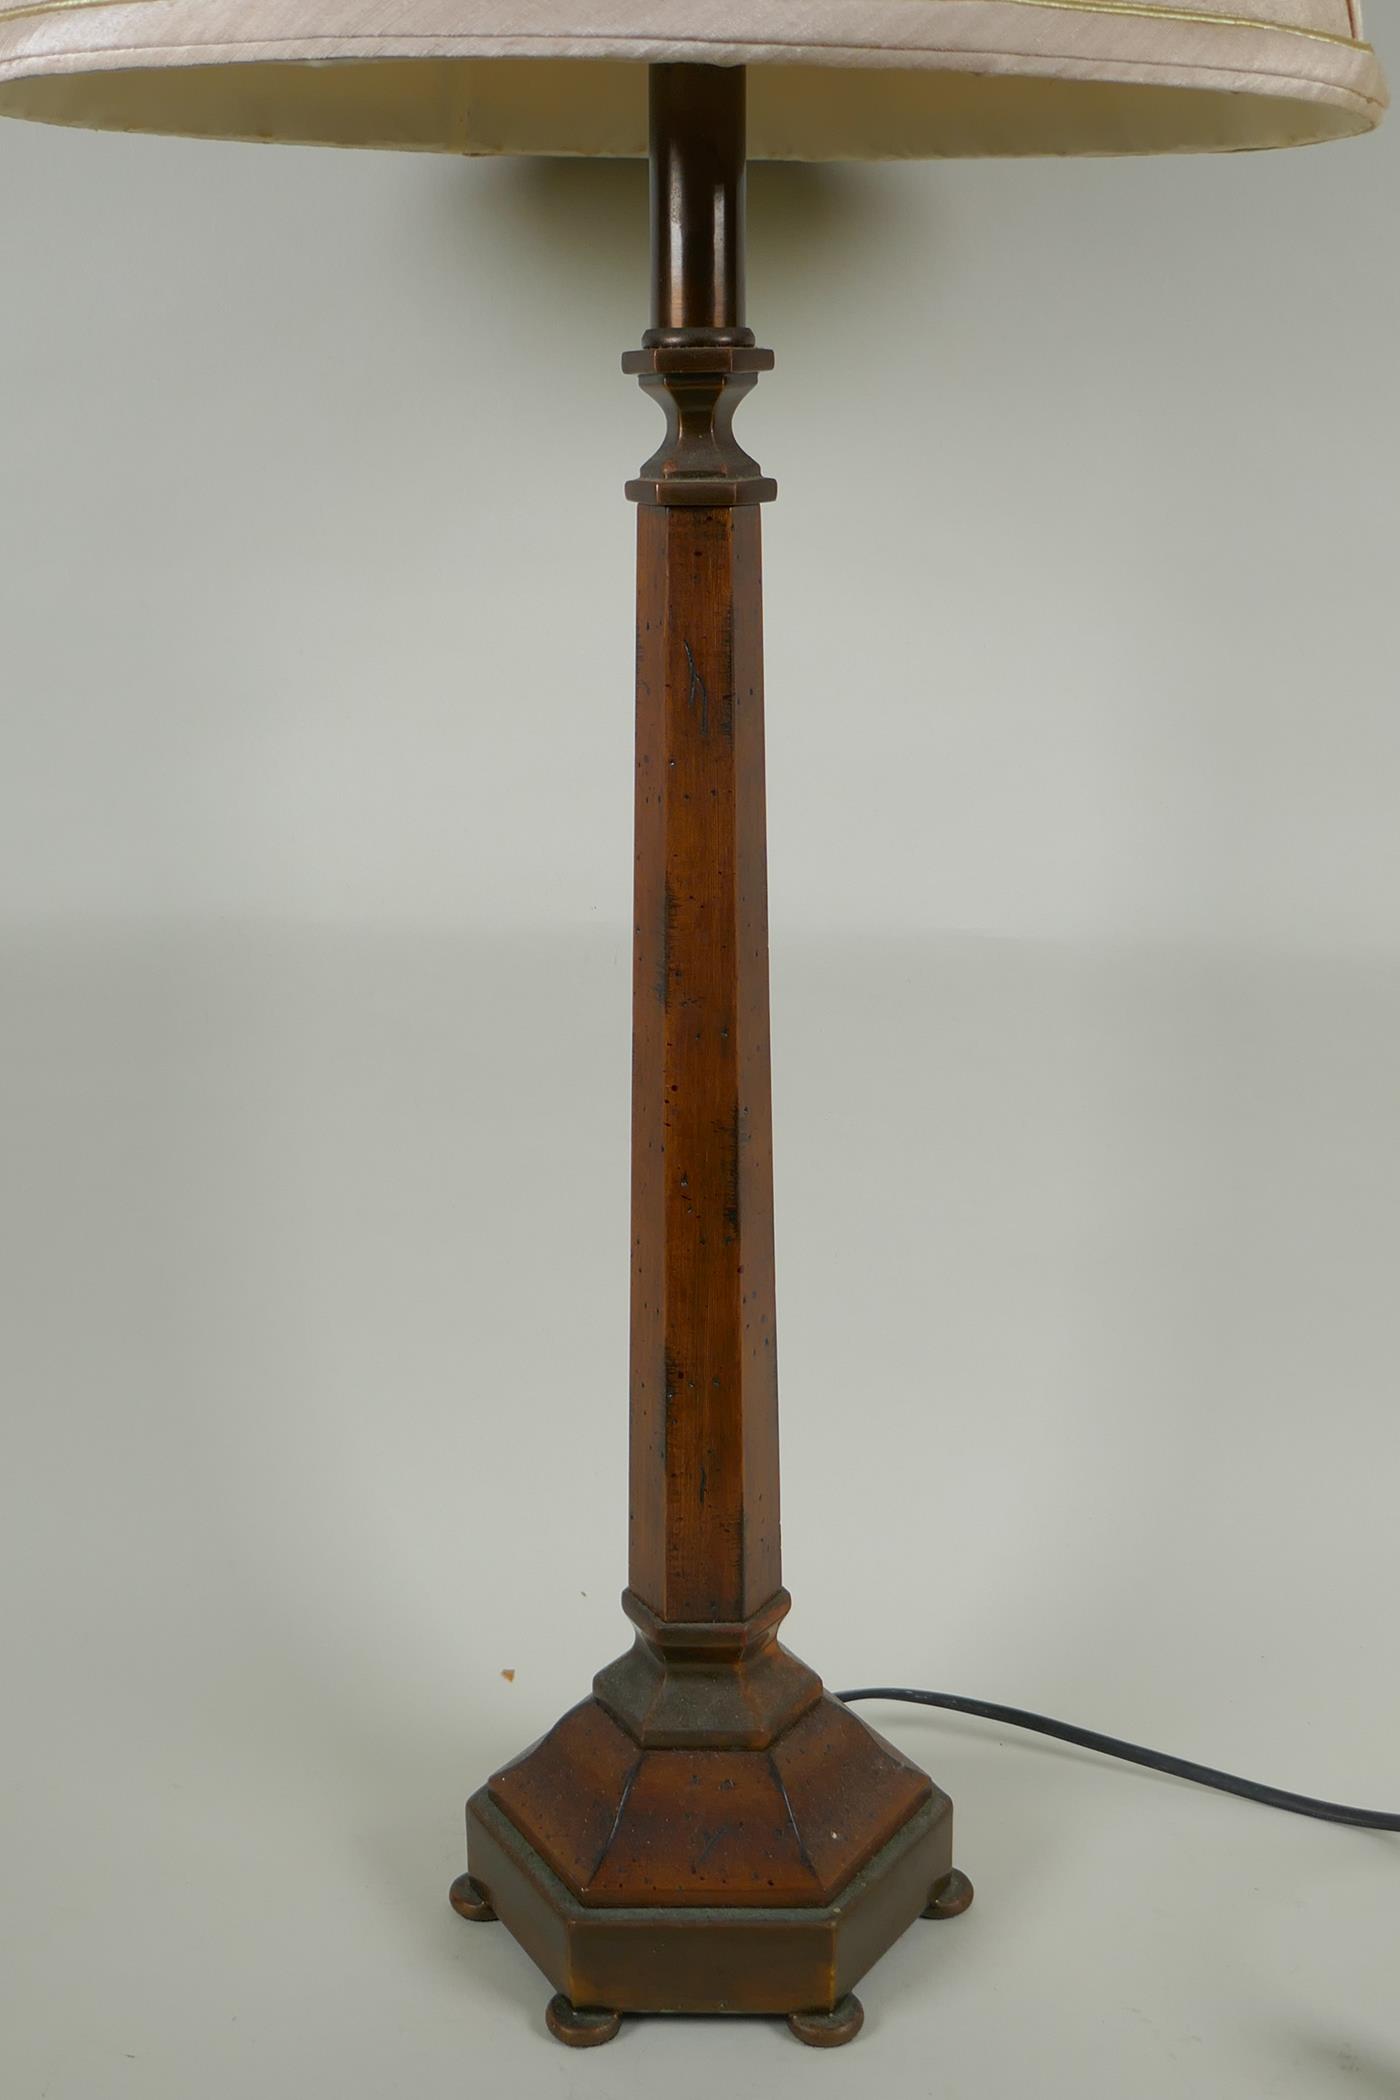 A grained wood and brass hexagonal column table lamp, 80cm high - Image 3 of 3